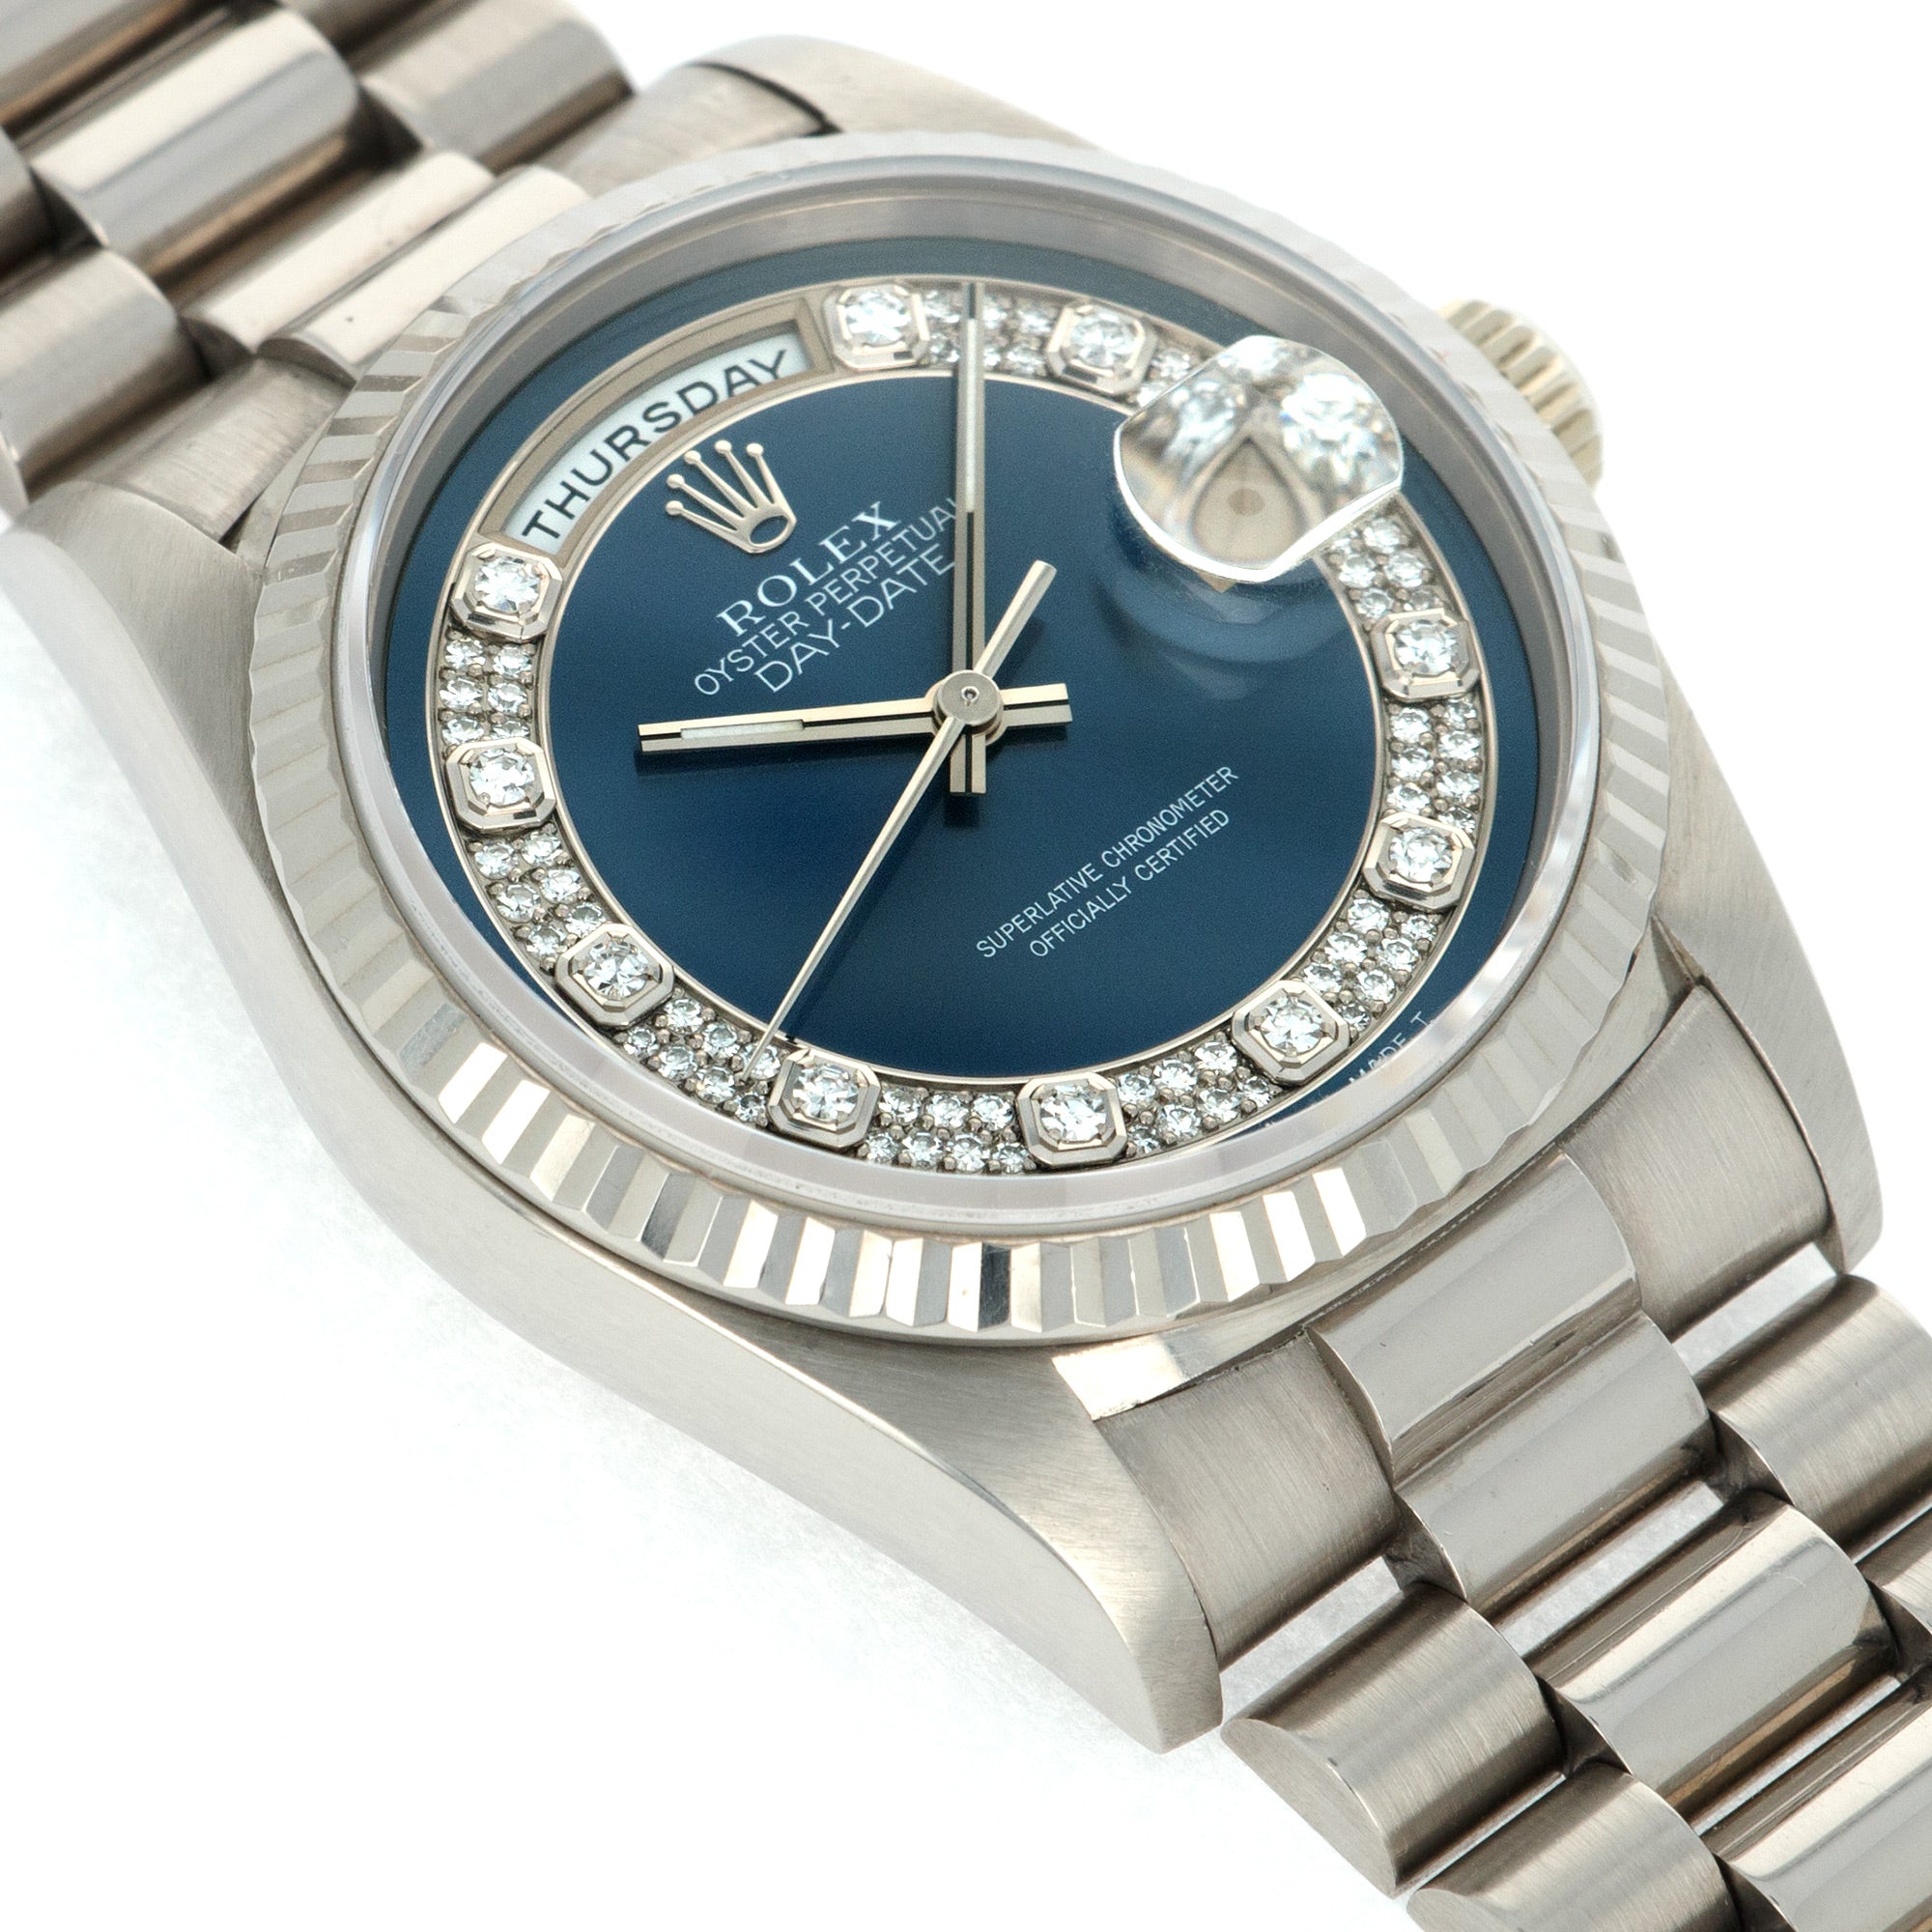 Rolex - Rolex Day-Date White Gold Ref. 18239 with Blue Diamond Dial and Original Papers - The Keystone Watches